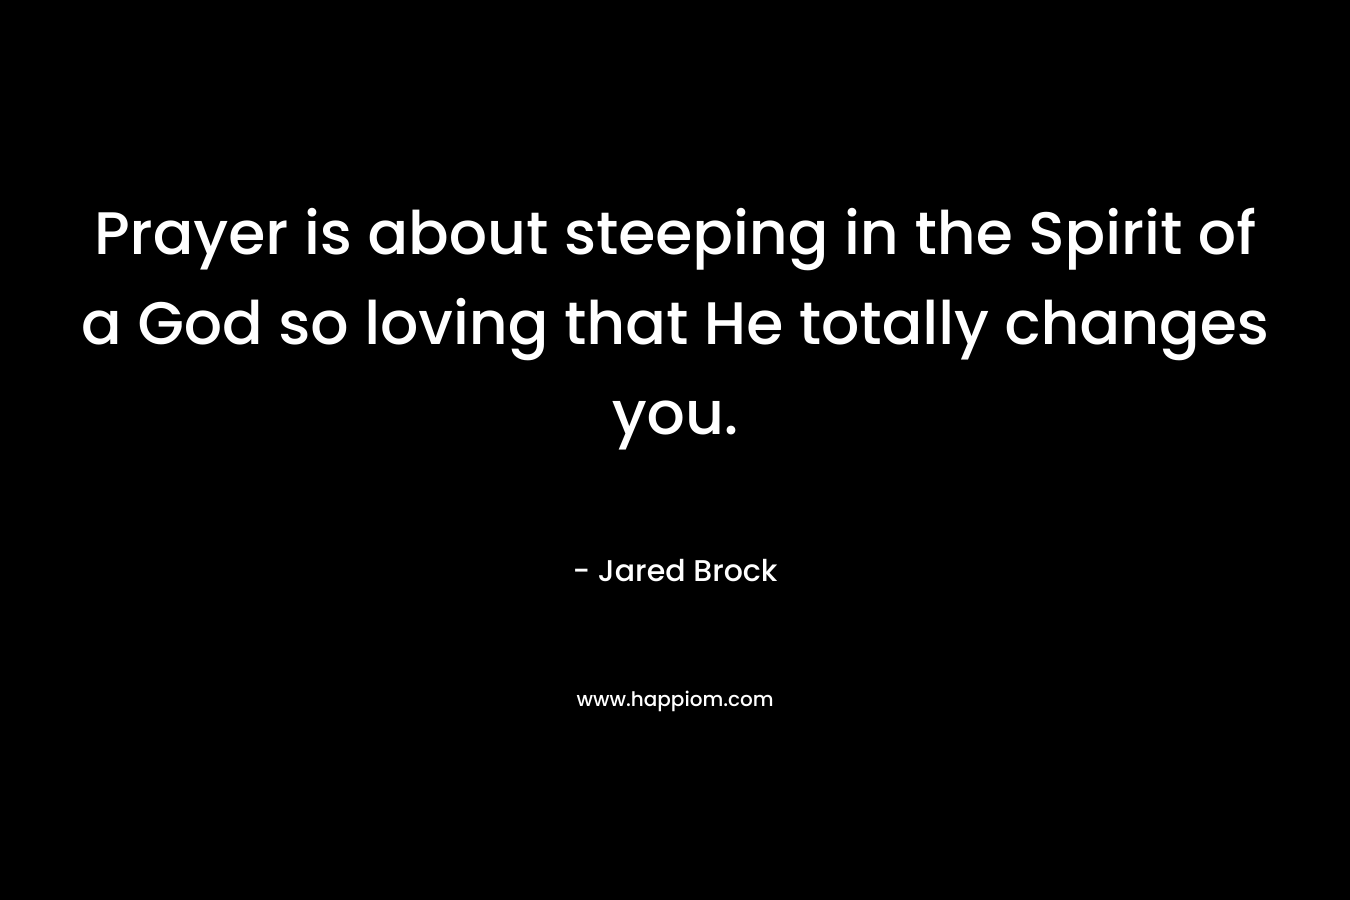 Prayer is about steeping in the Spirit of a God so loving that He totally changes you. – Jared Brock